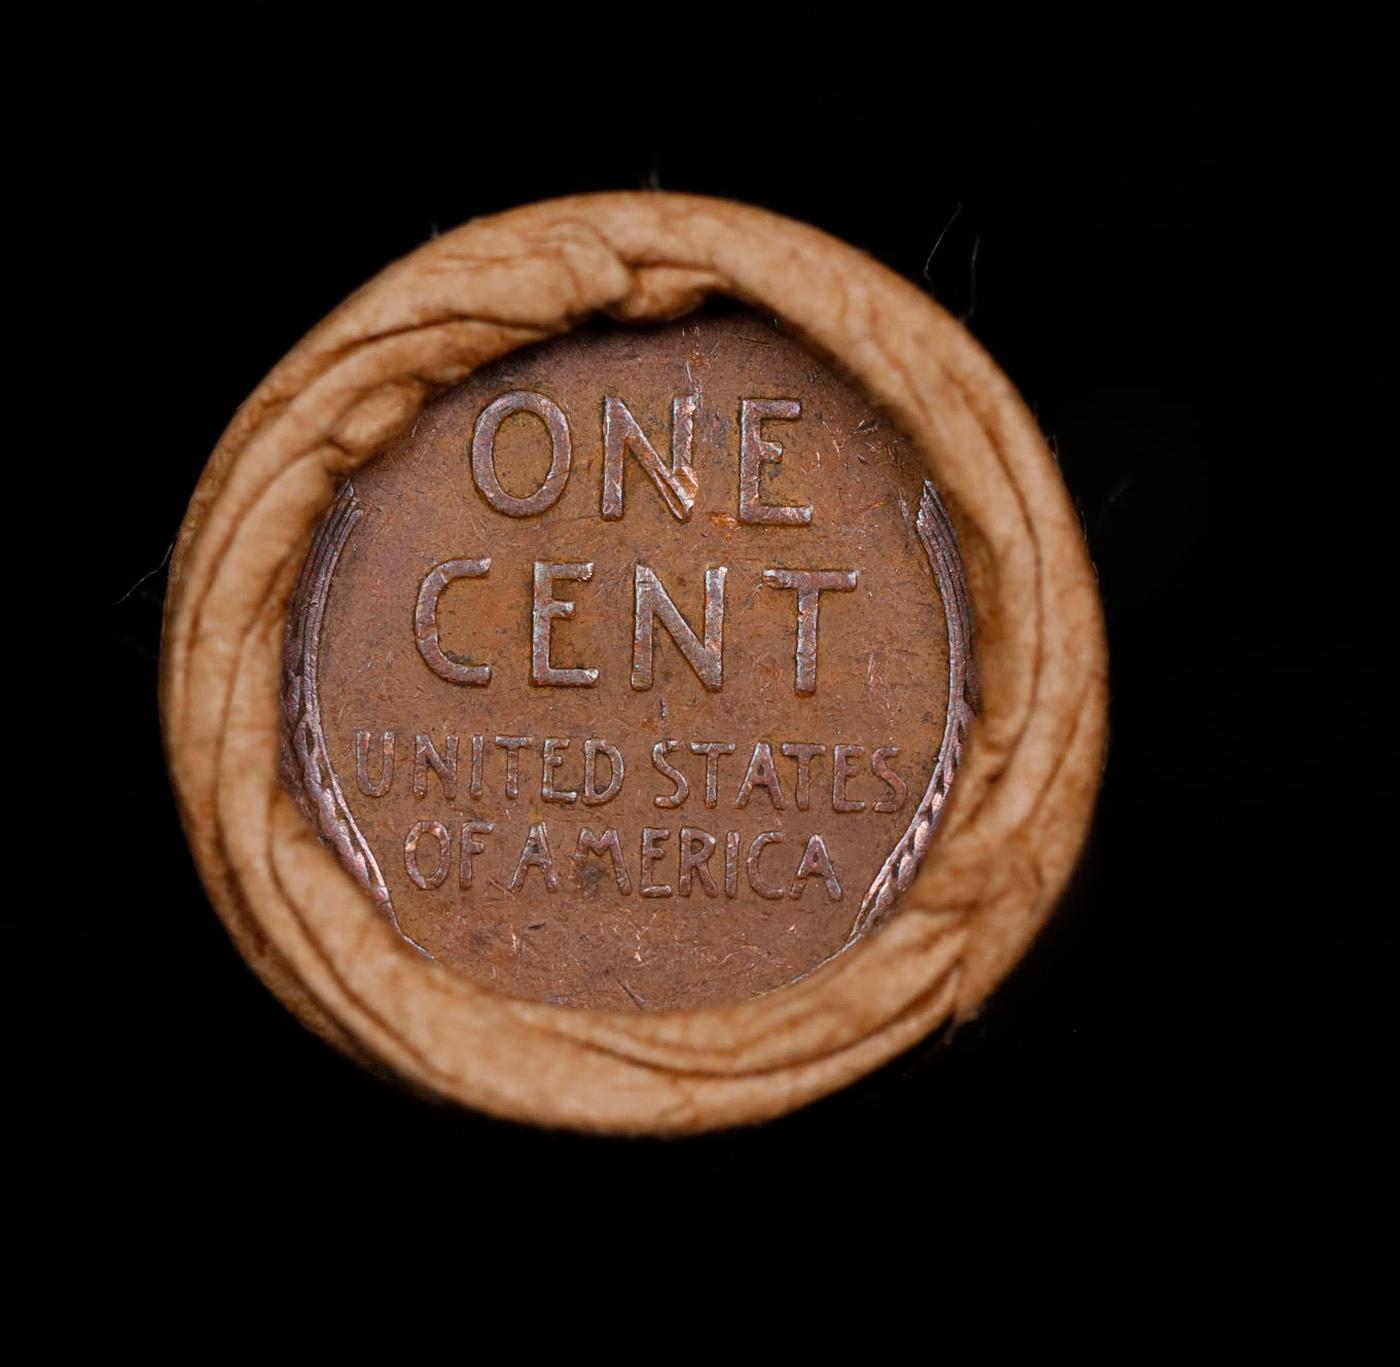 Lincoln Wheat Cent 1c Mixed Roll Orig Brandt McDonalds Wrapper, 1928-p end, Wheat other end